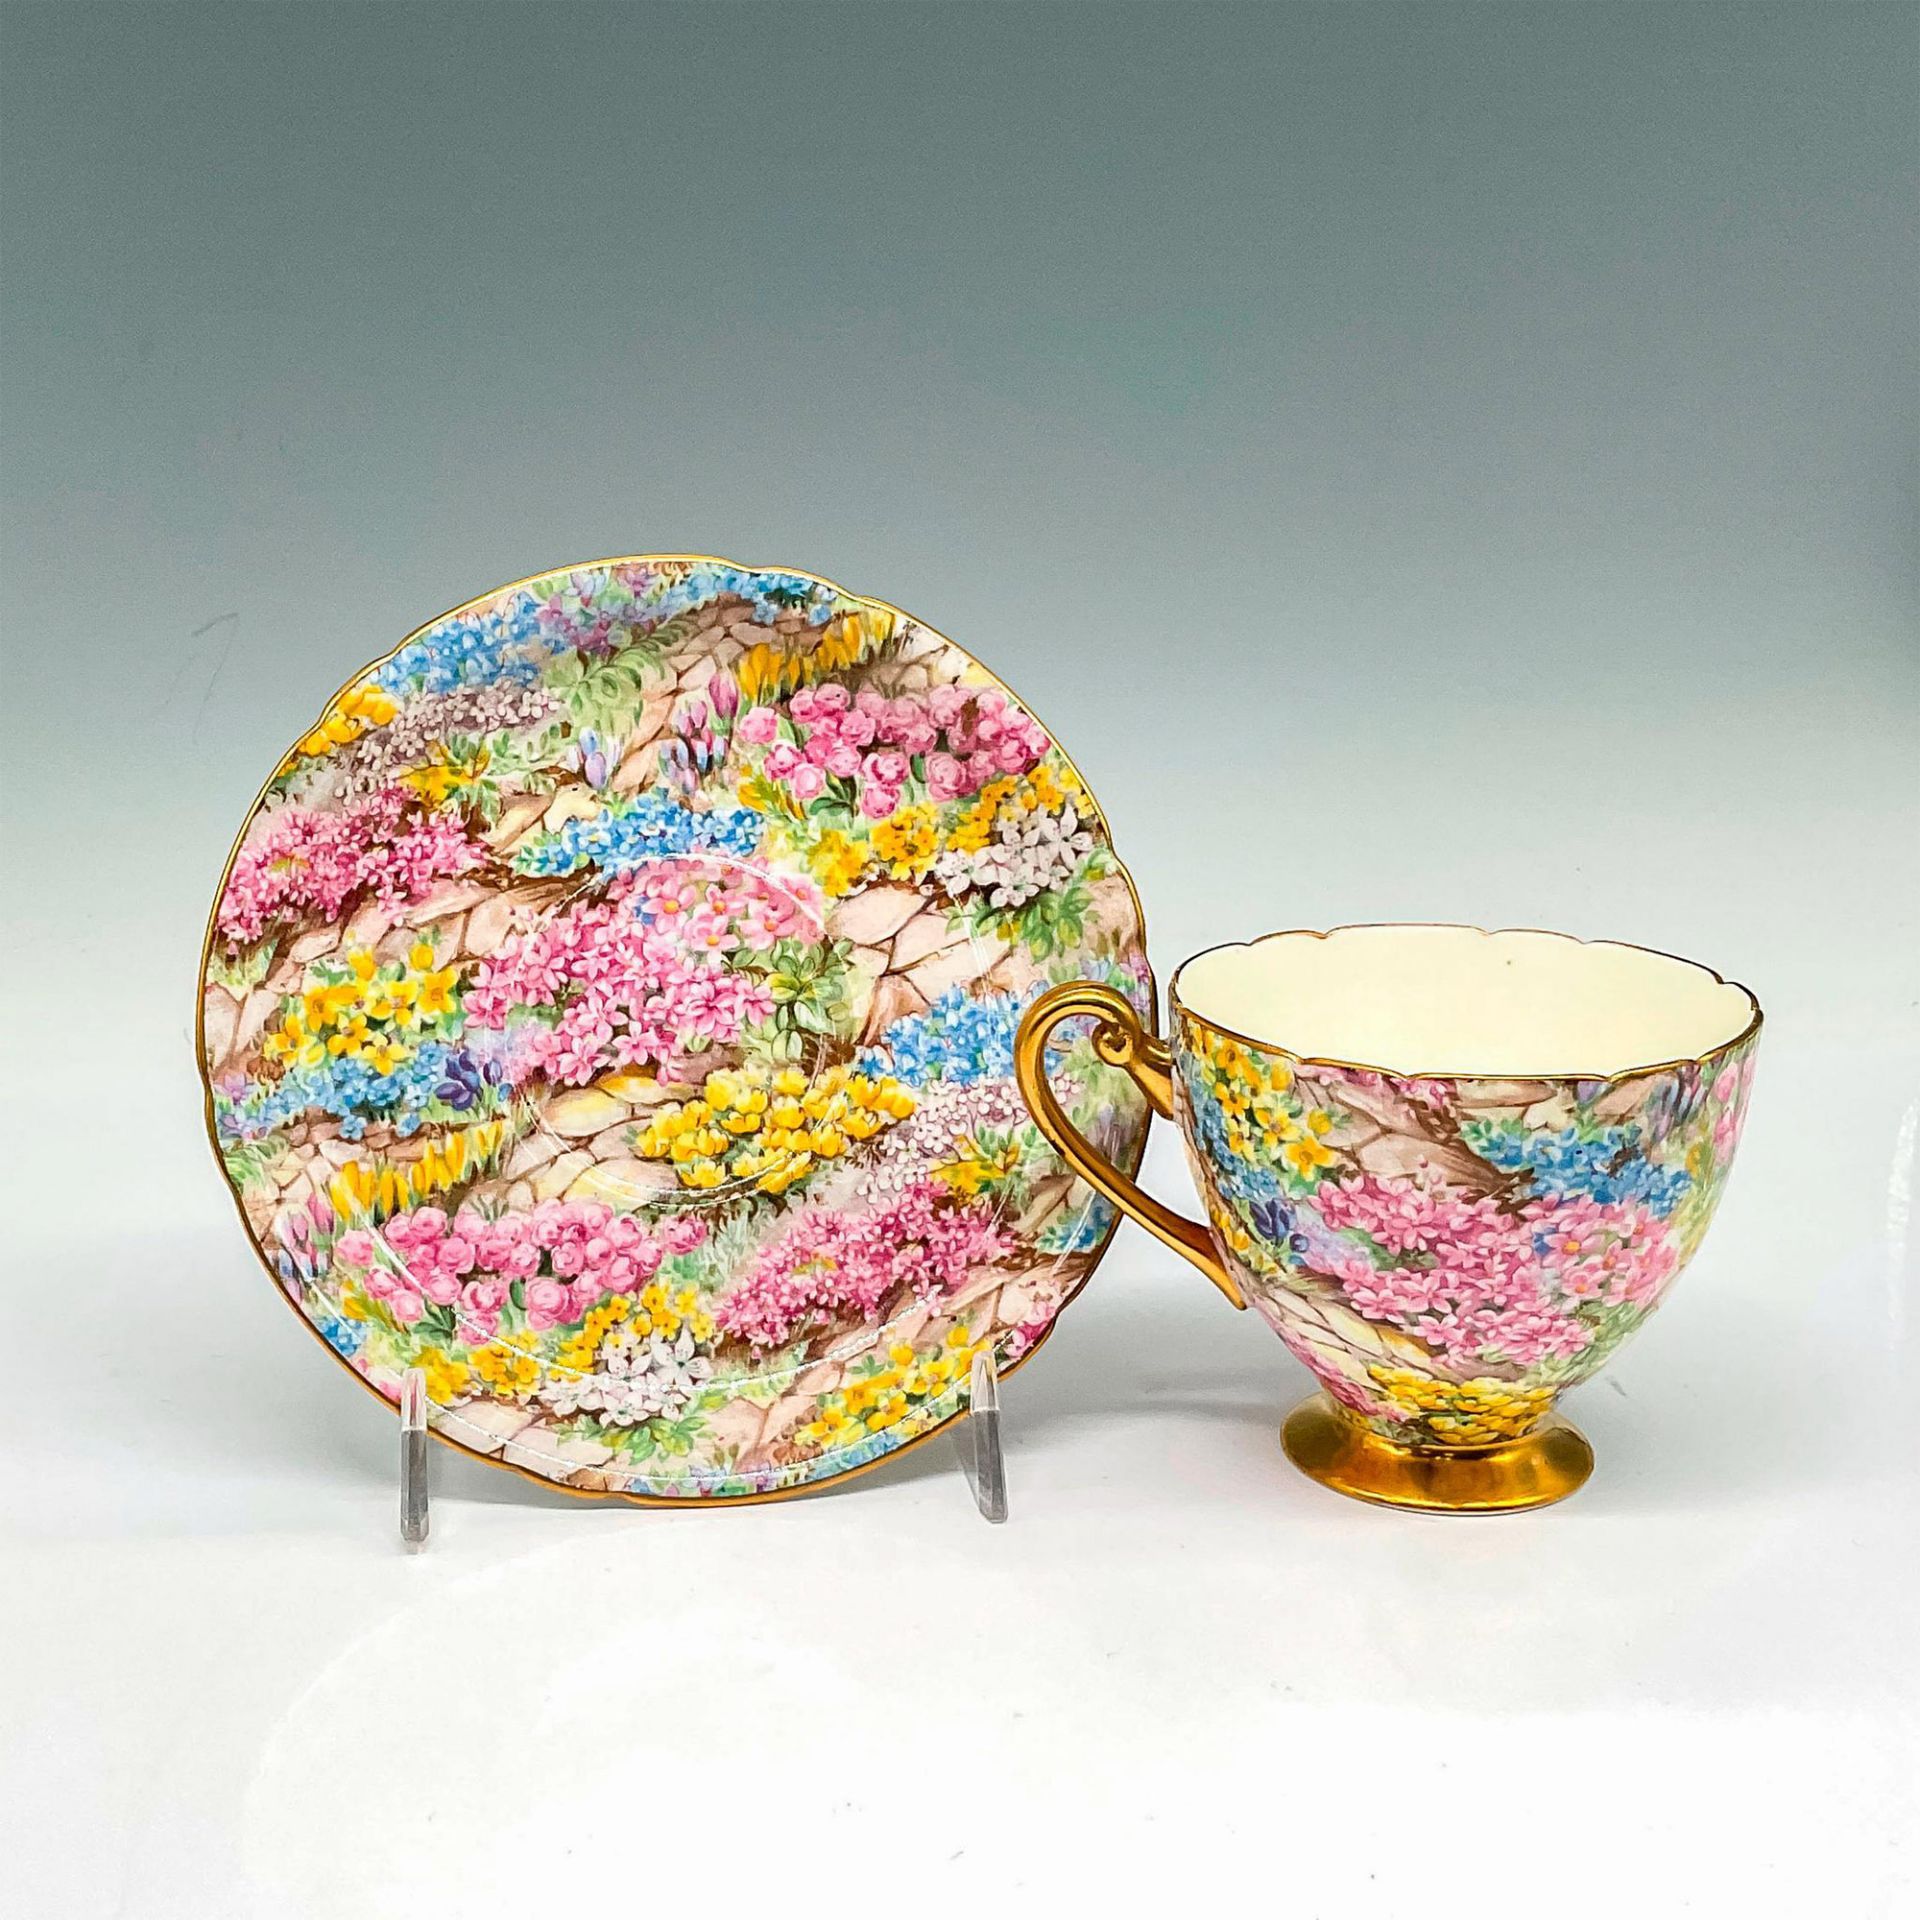 2pc Shelley Bone China Teacup and Saucer, Rock Garden - Image 2 of 3